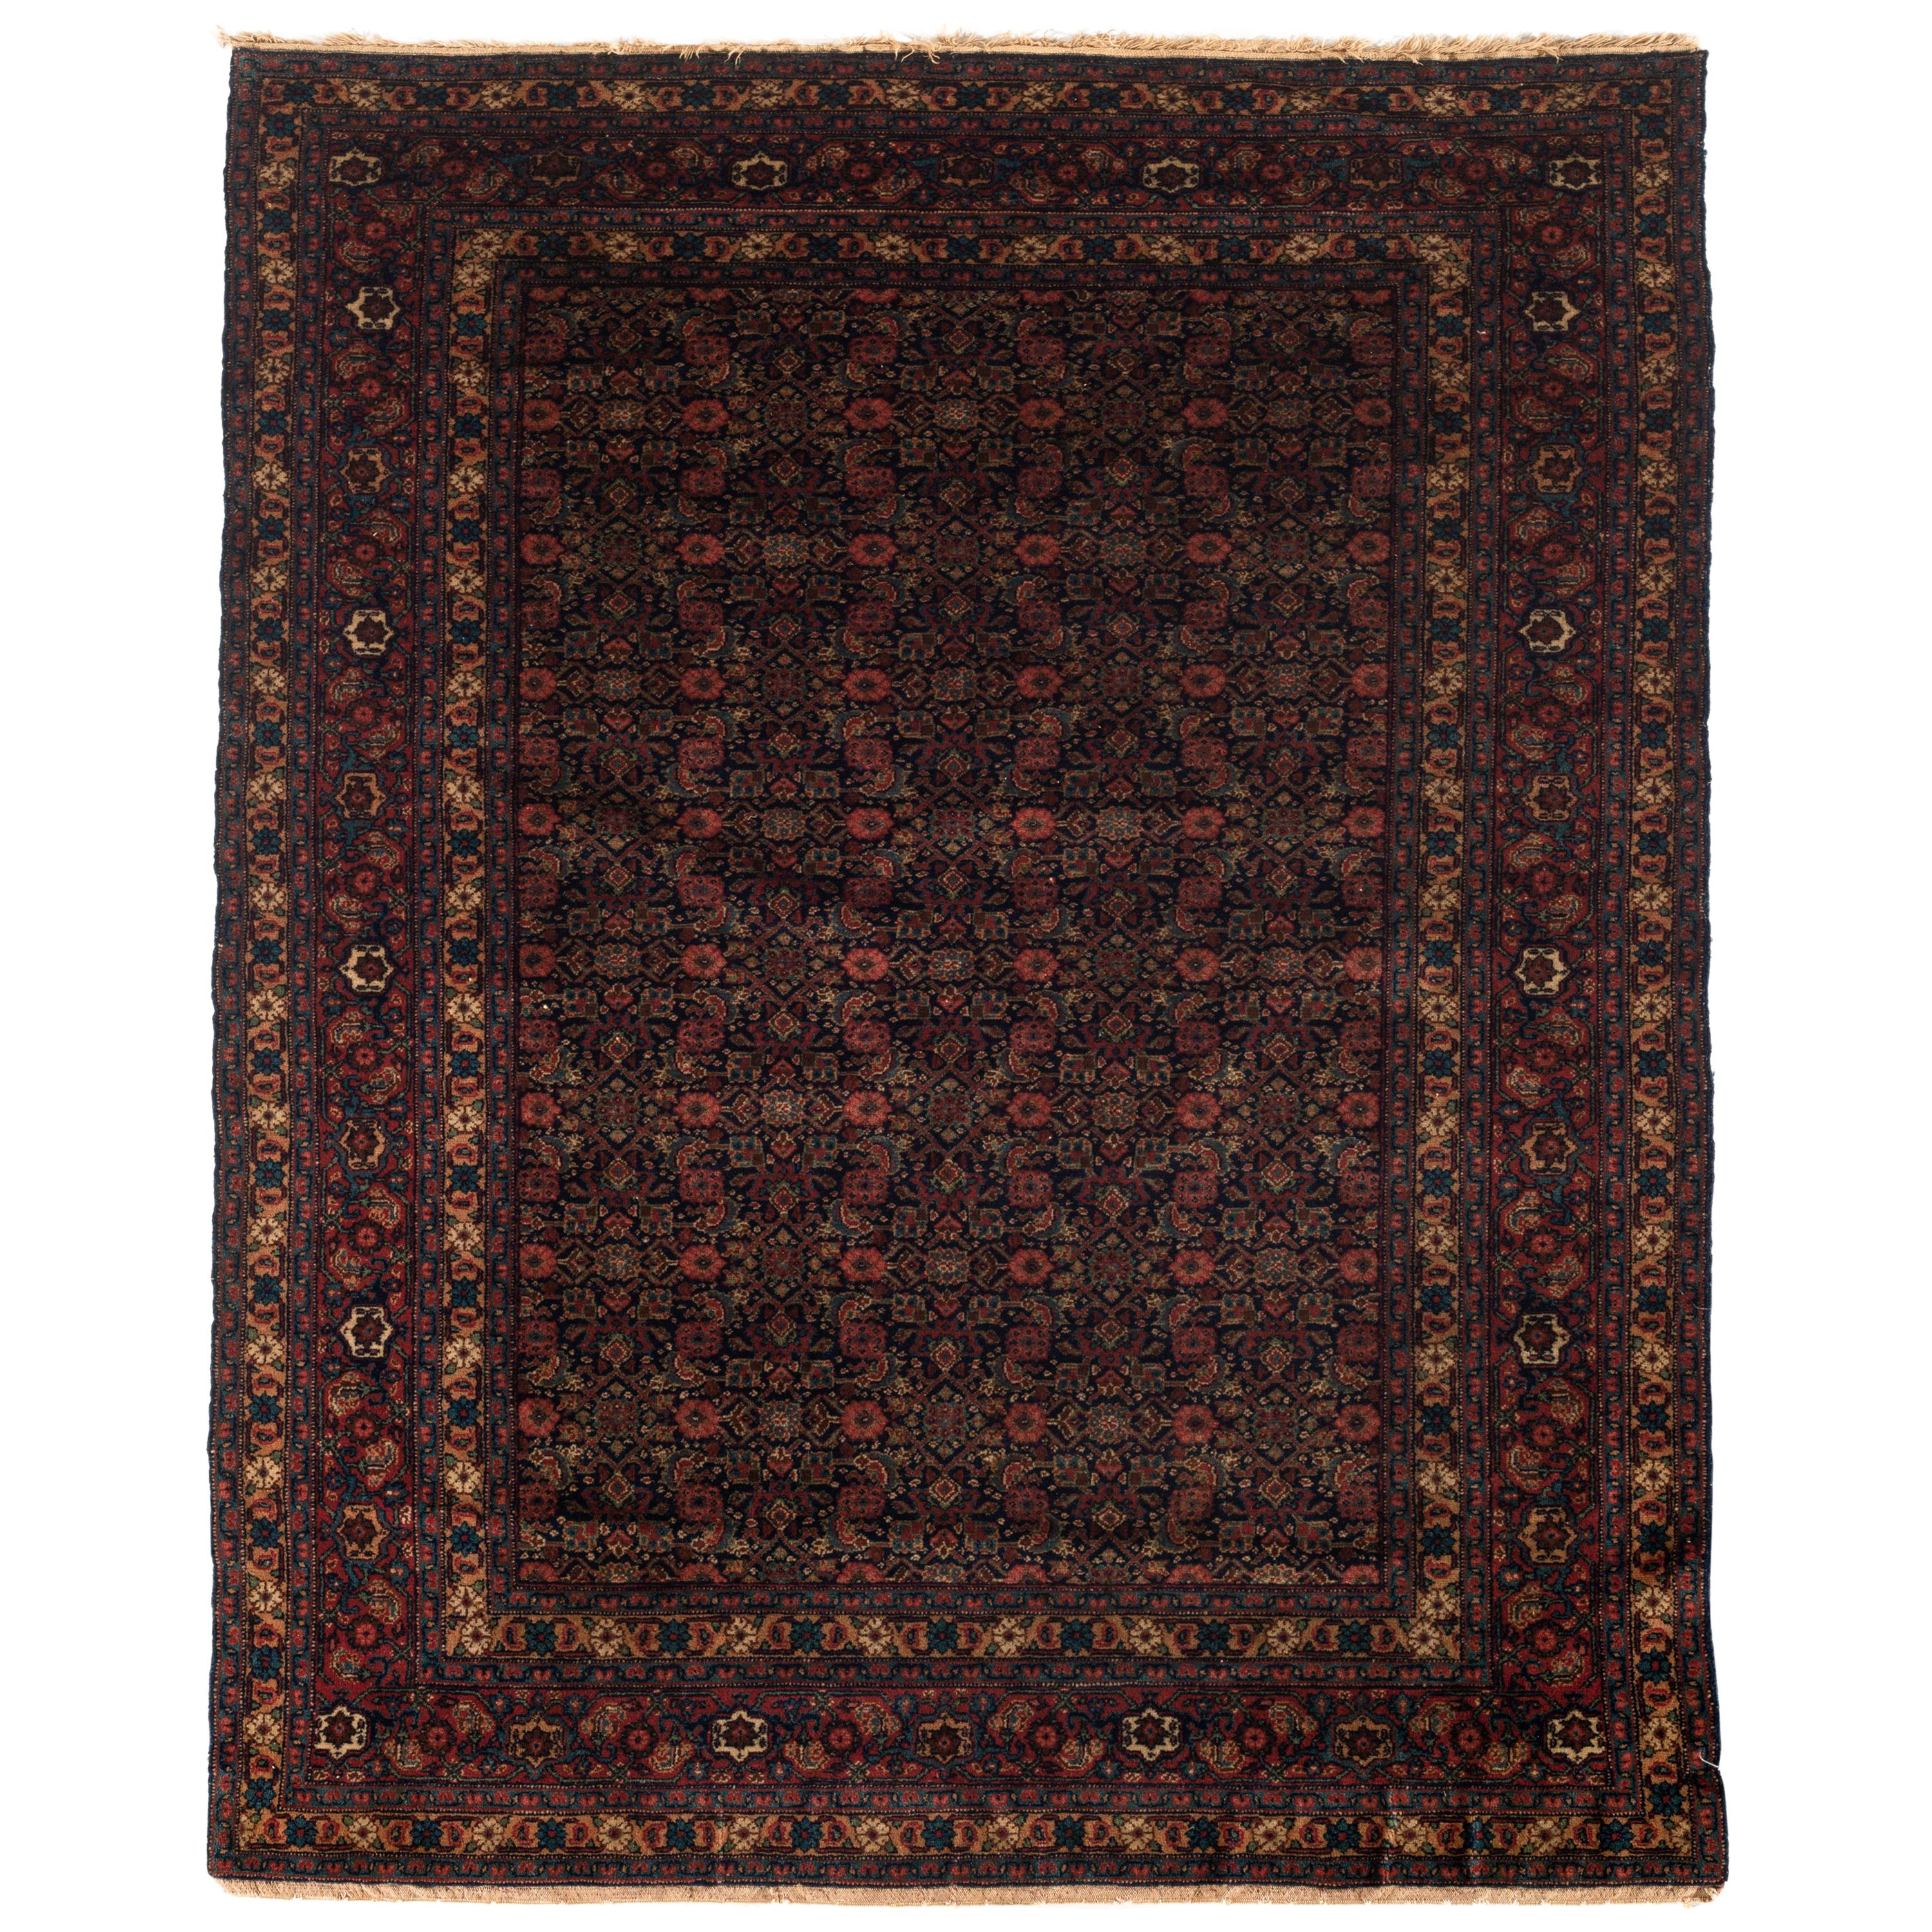 Antique Persian Senneh Rug, circa 1900 One of a Pair For Sale